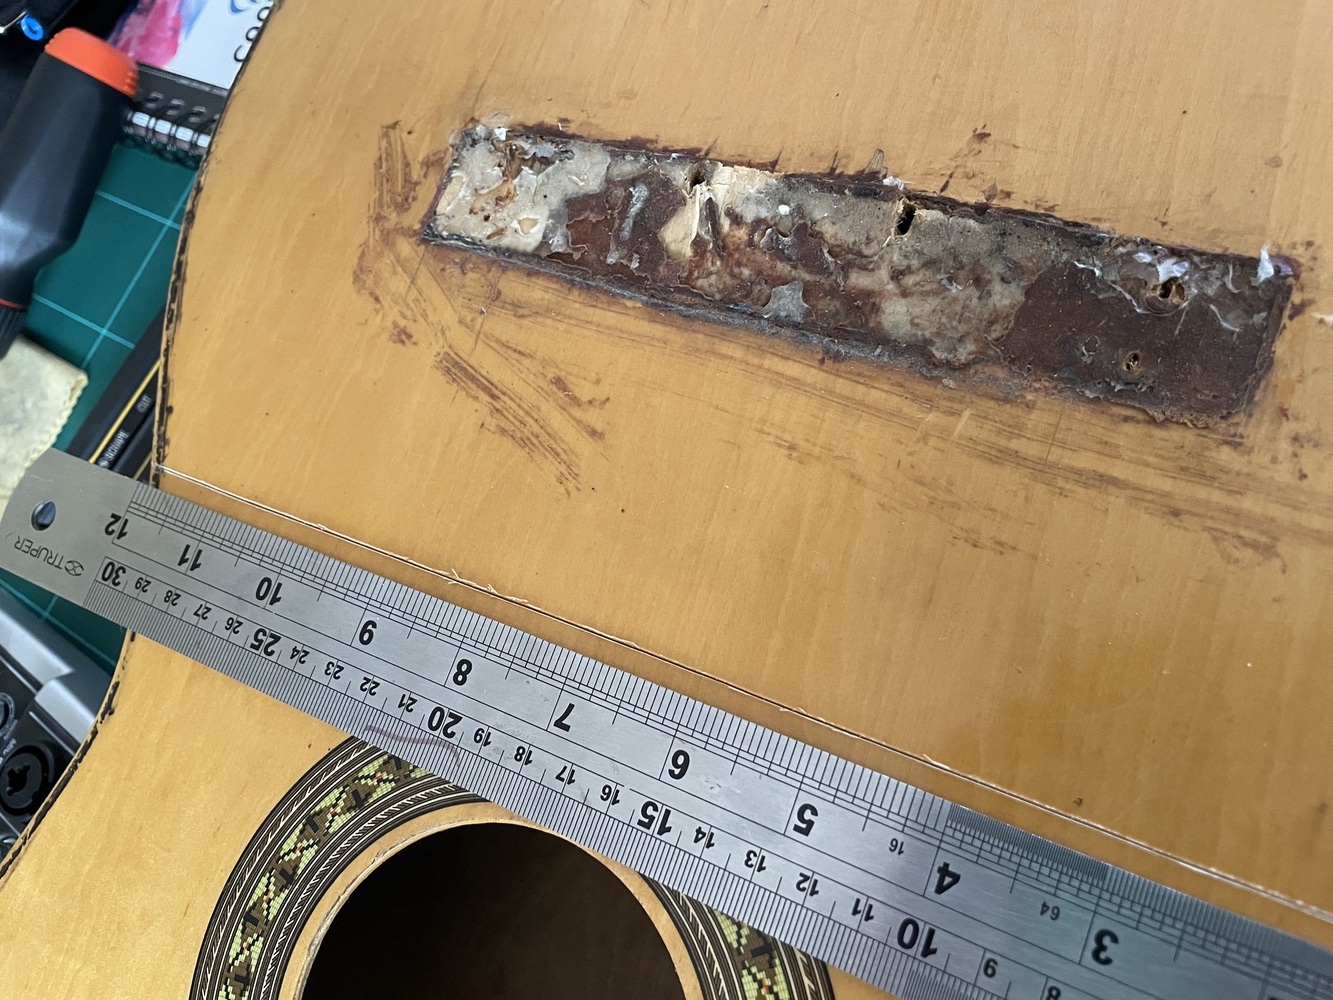 A ruler on the guitar showing where I cut it through" 